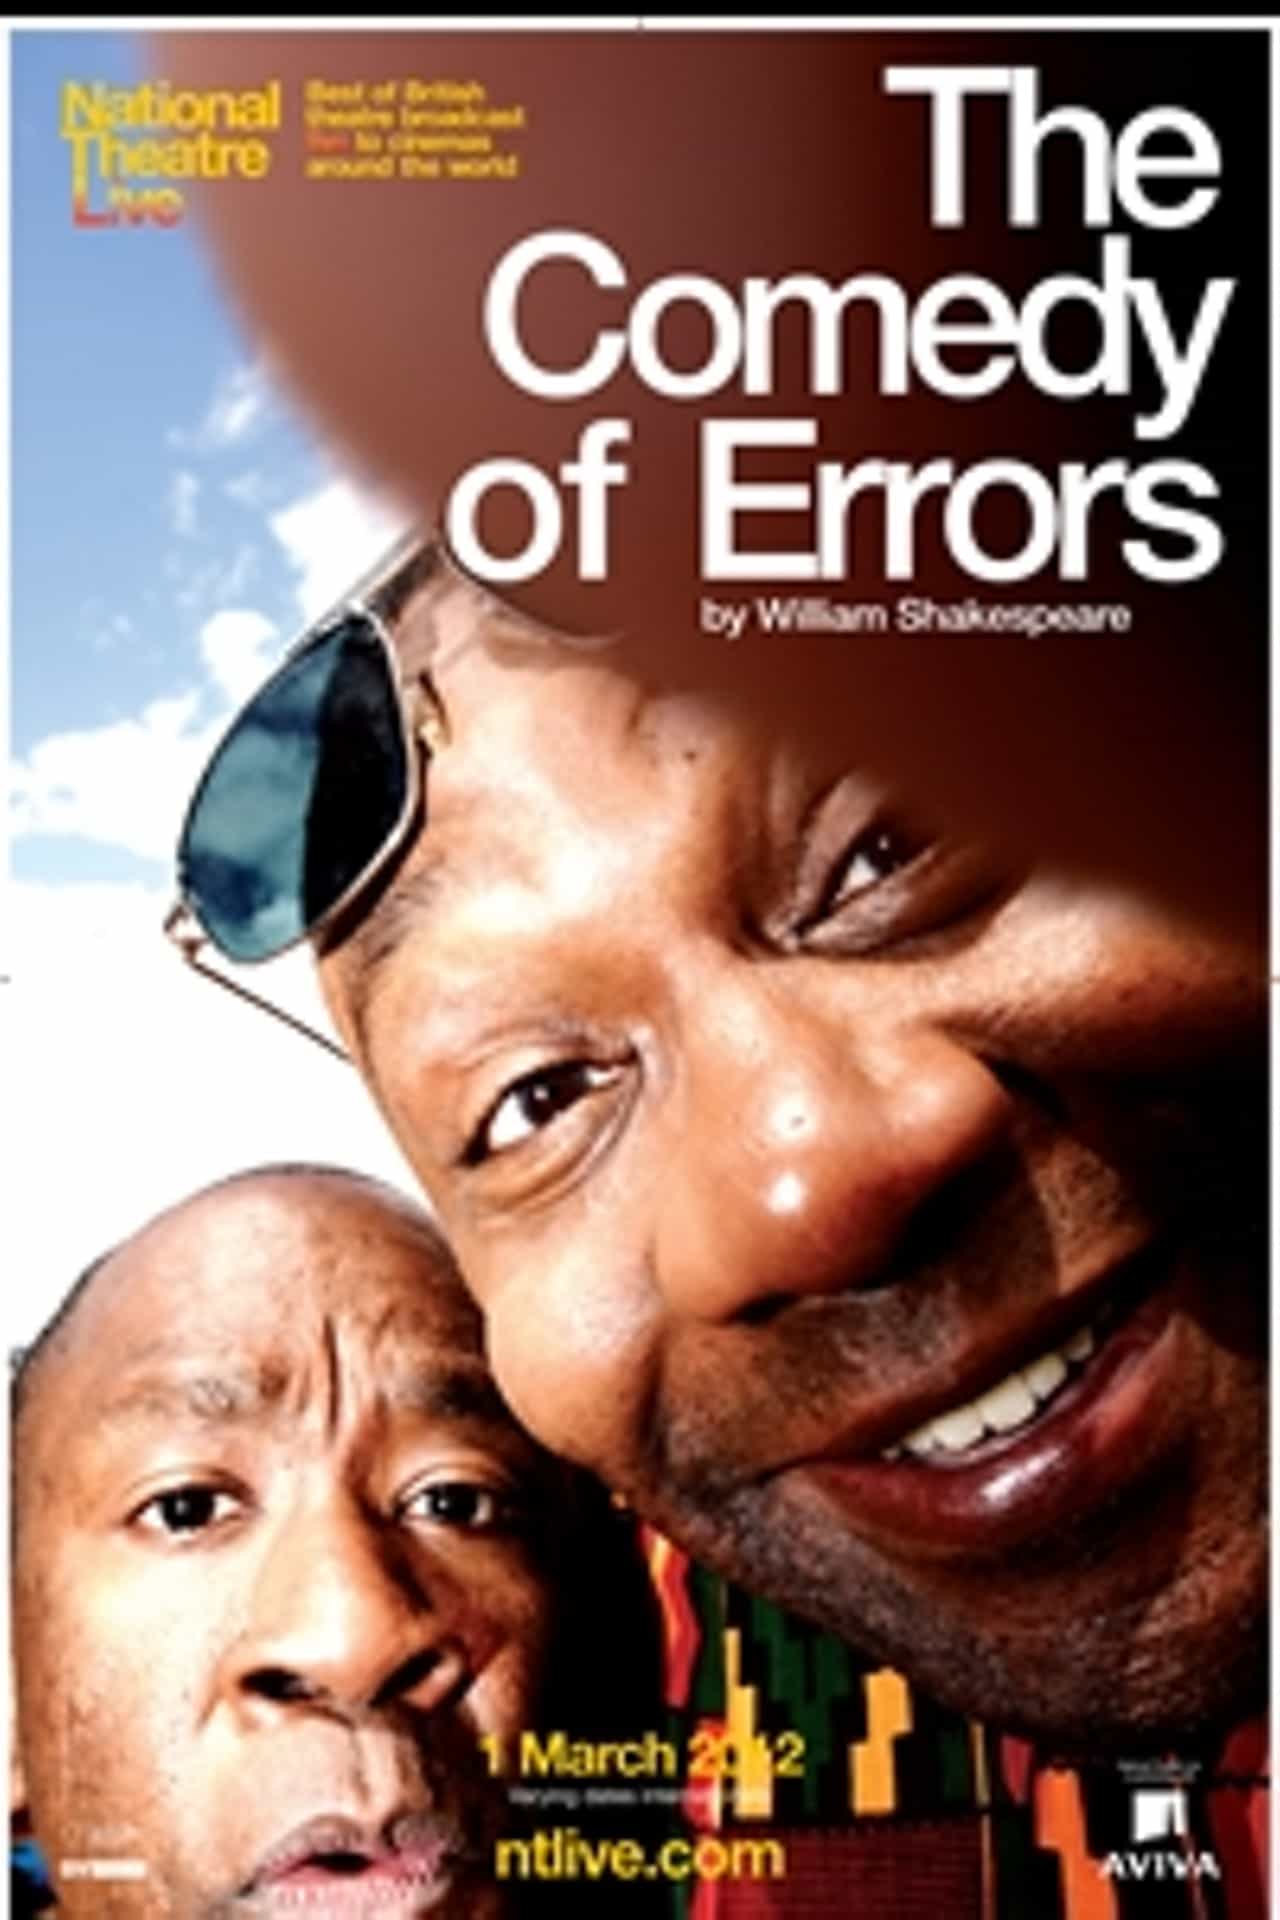 The Comedy of Errors: NT Live